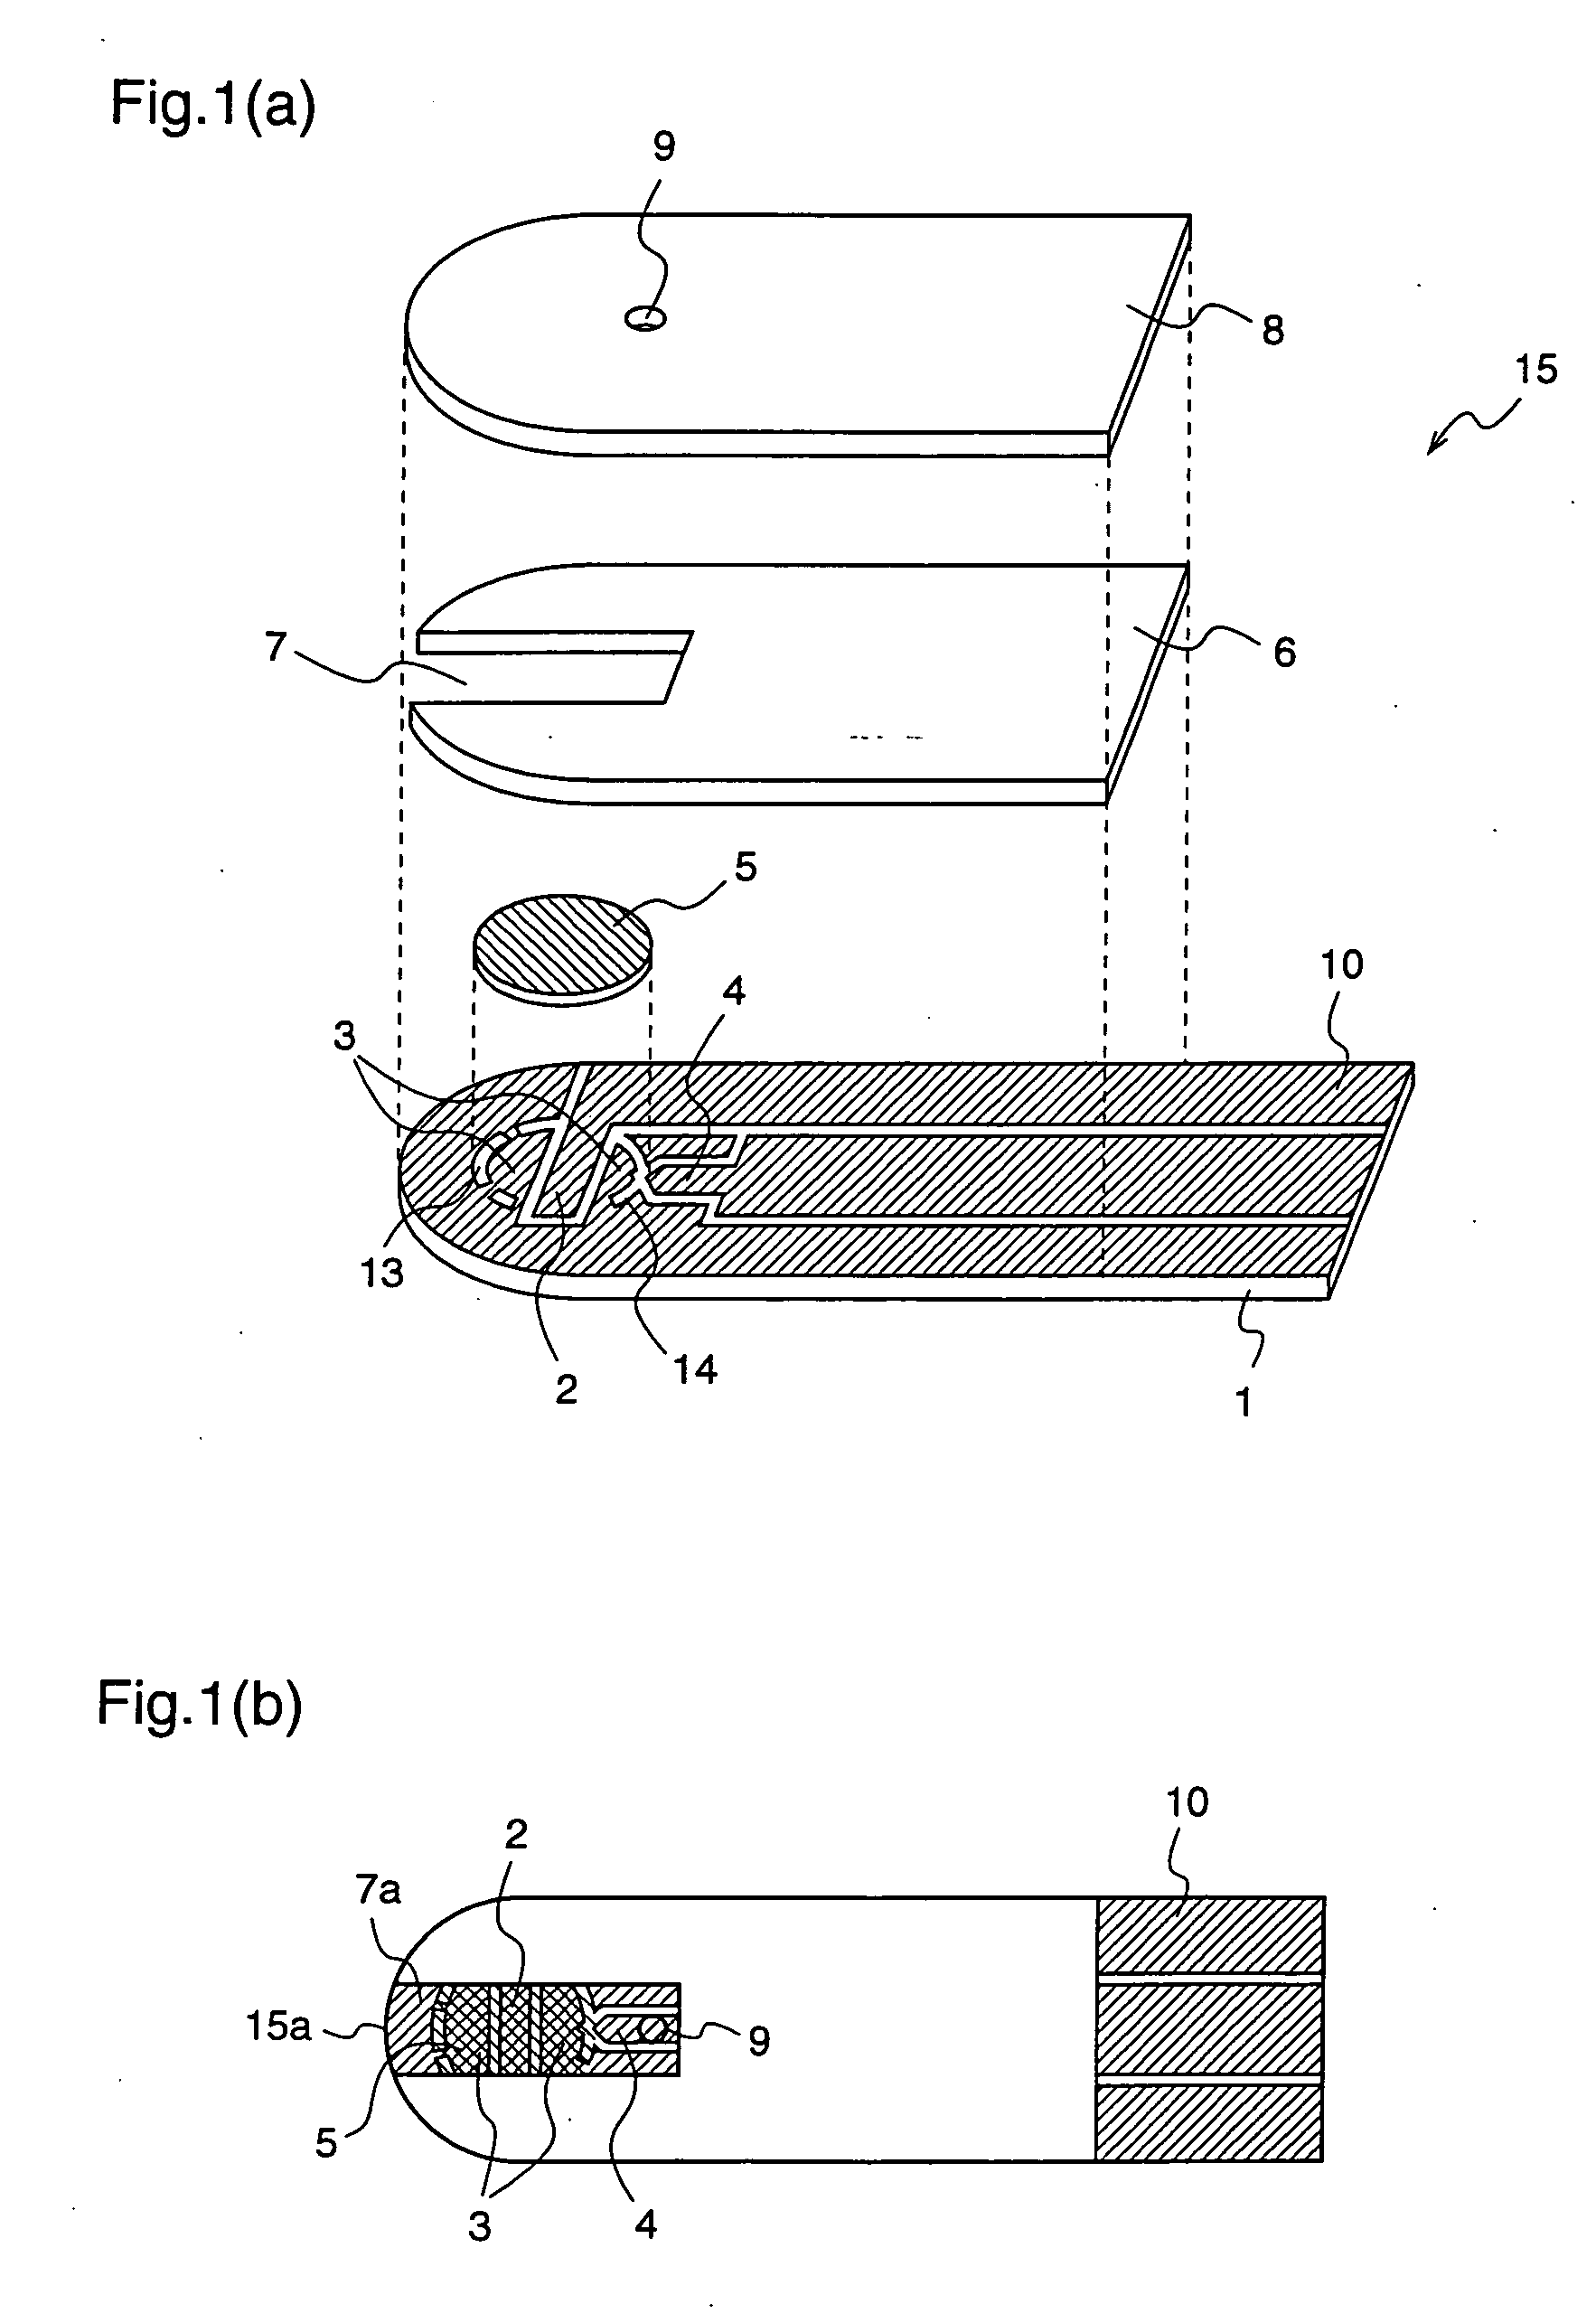 Determination method for automatically identifying analyte liquid and standard solution for biosensor